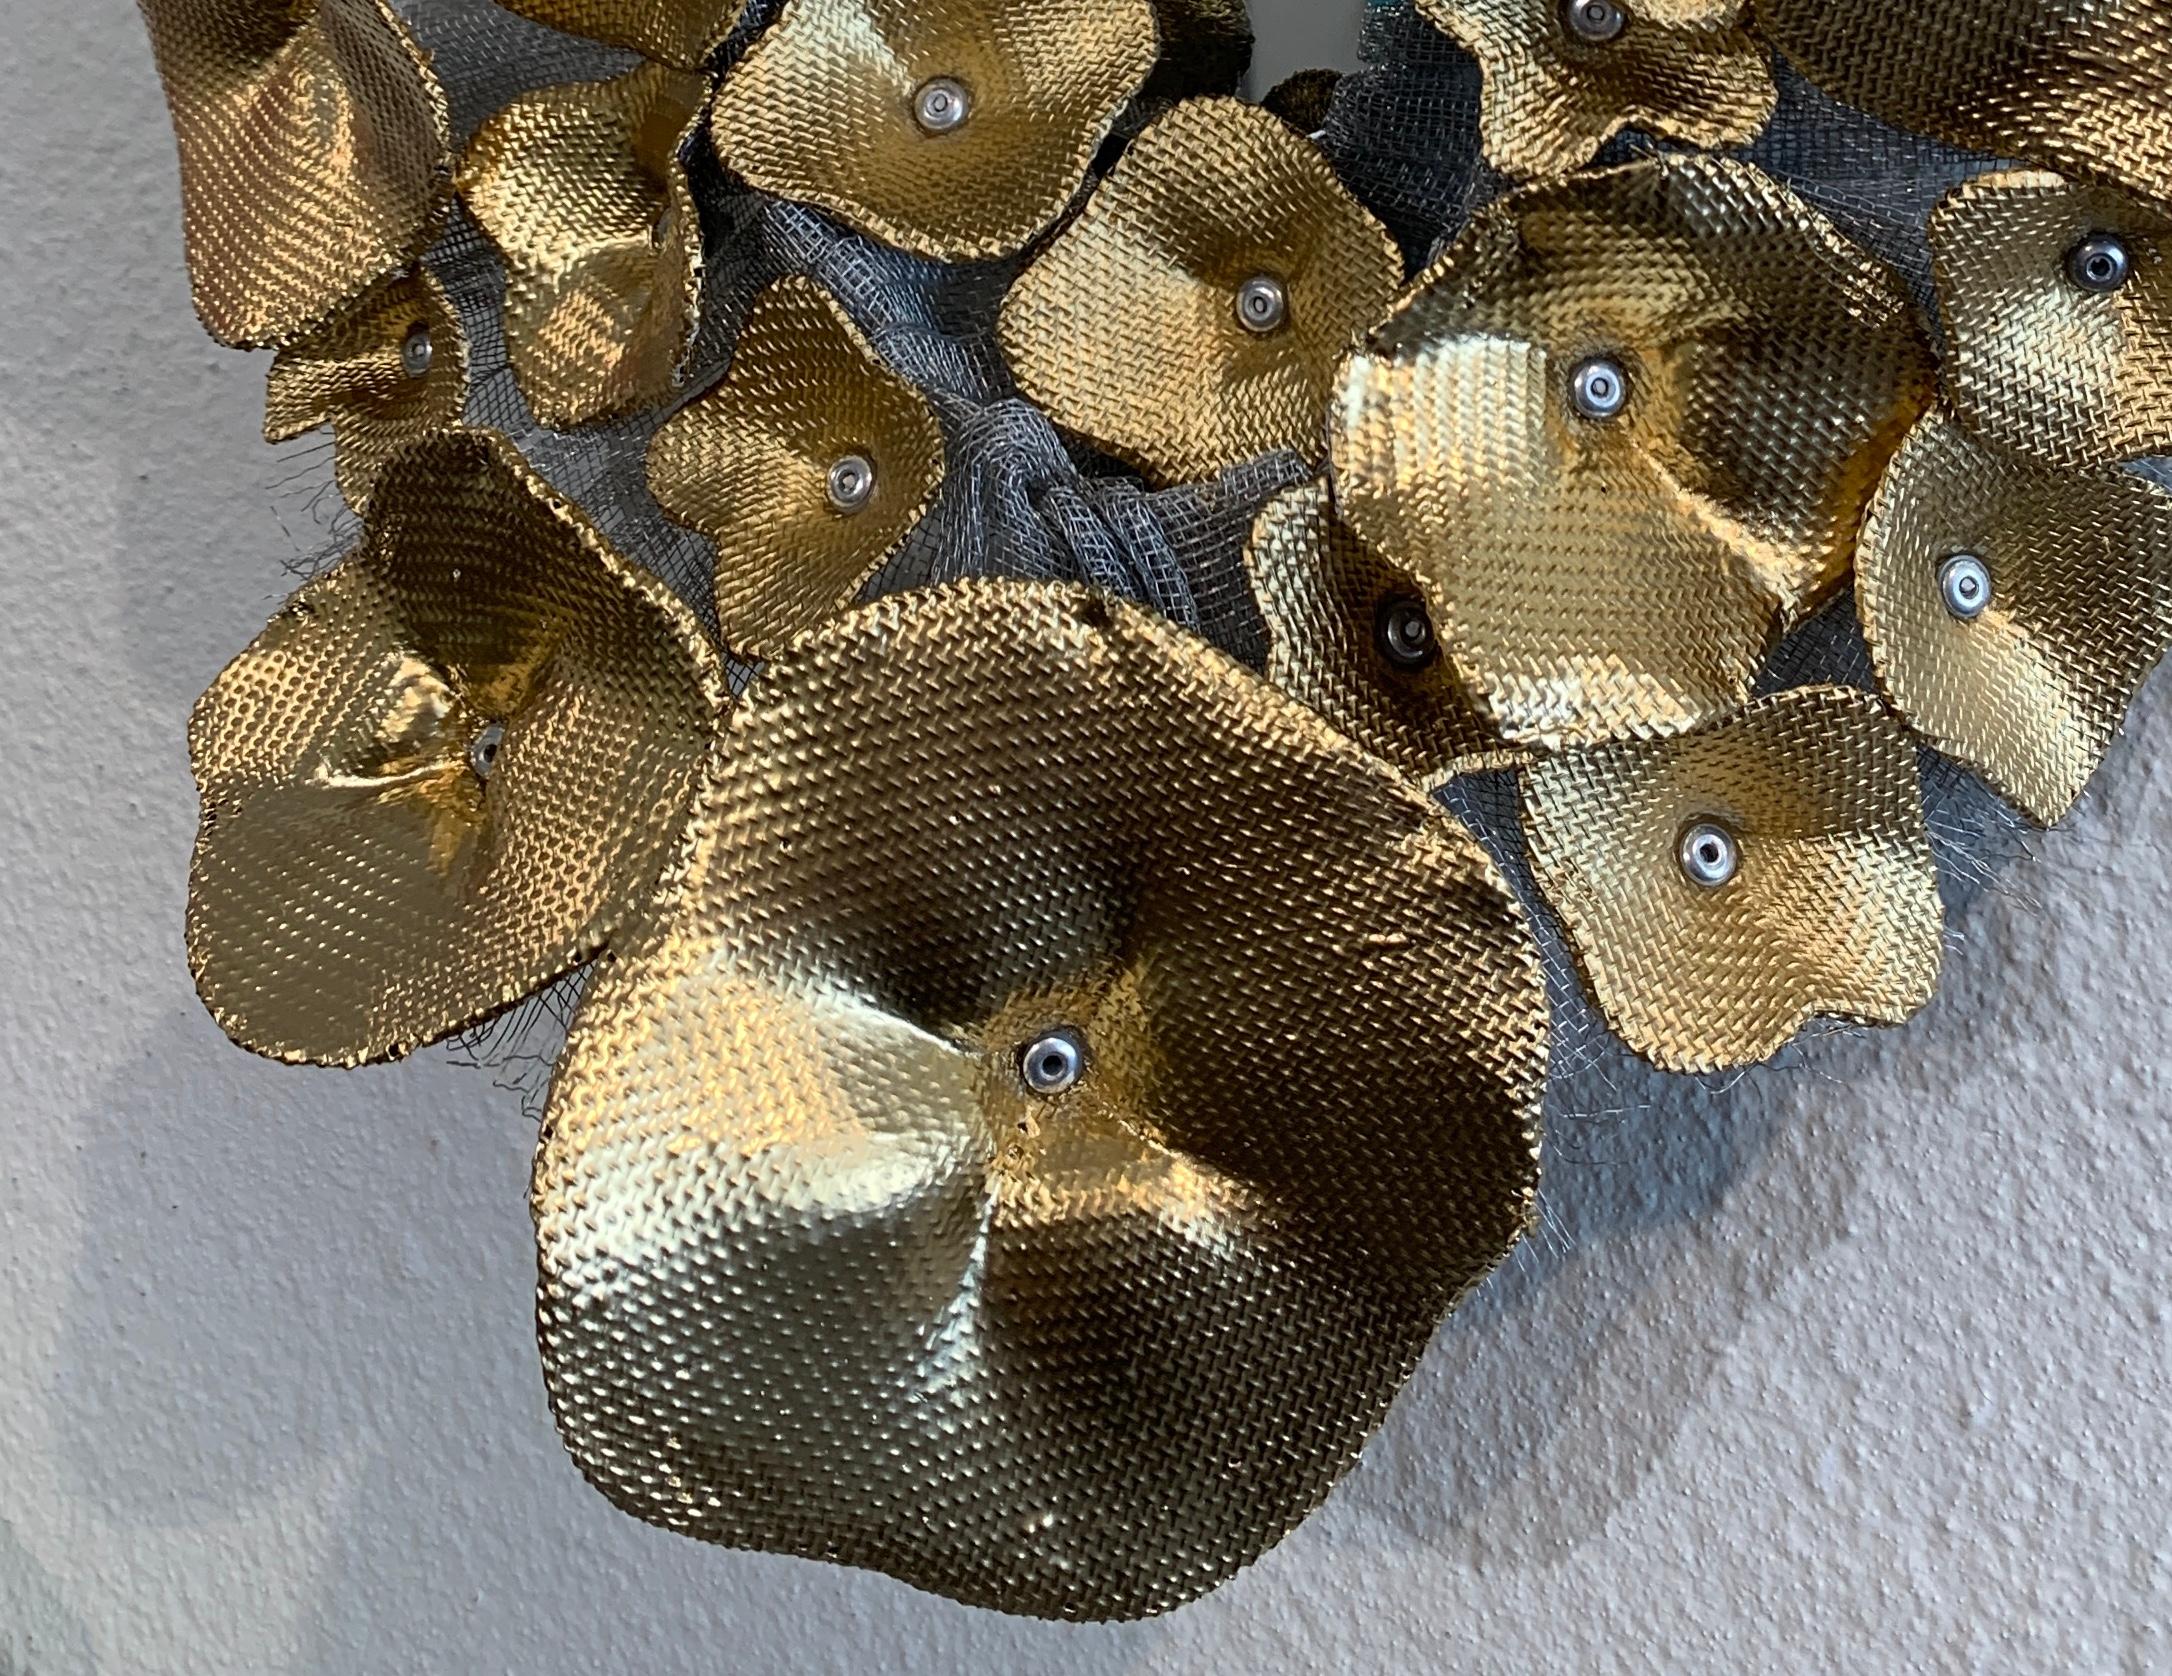 Flora Narcissus - Golden Hydrangea, Atticus Adams Mesh & Mirror Wall Sculpture

Metal fiber sculpture that incorporates a mirror, fascinating light and shadow into its form.

NOTE:  This piece can be combined with the OTHER Flora Narcissus pieces to